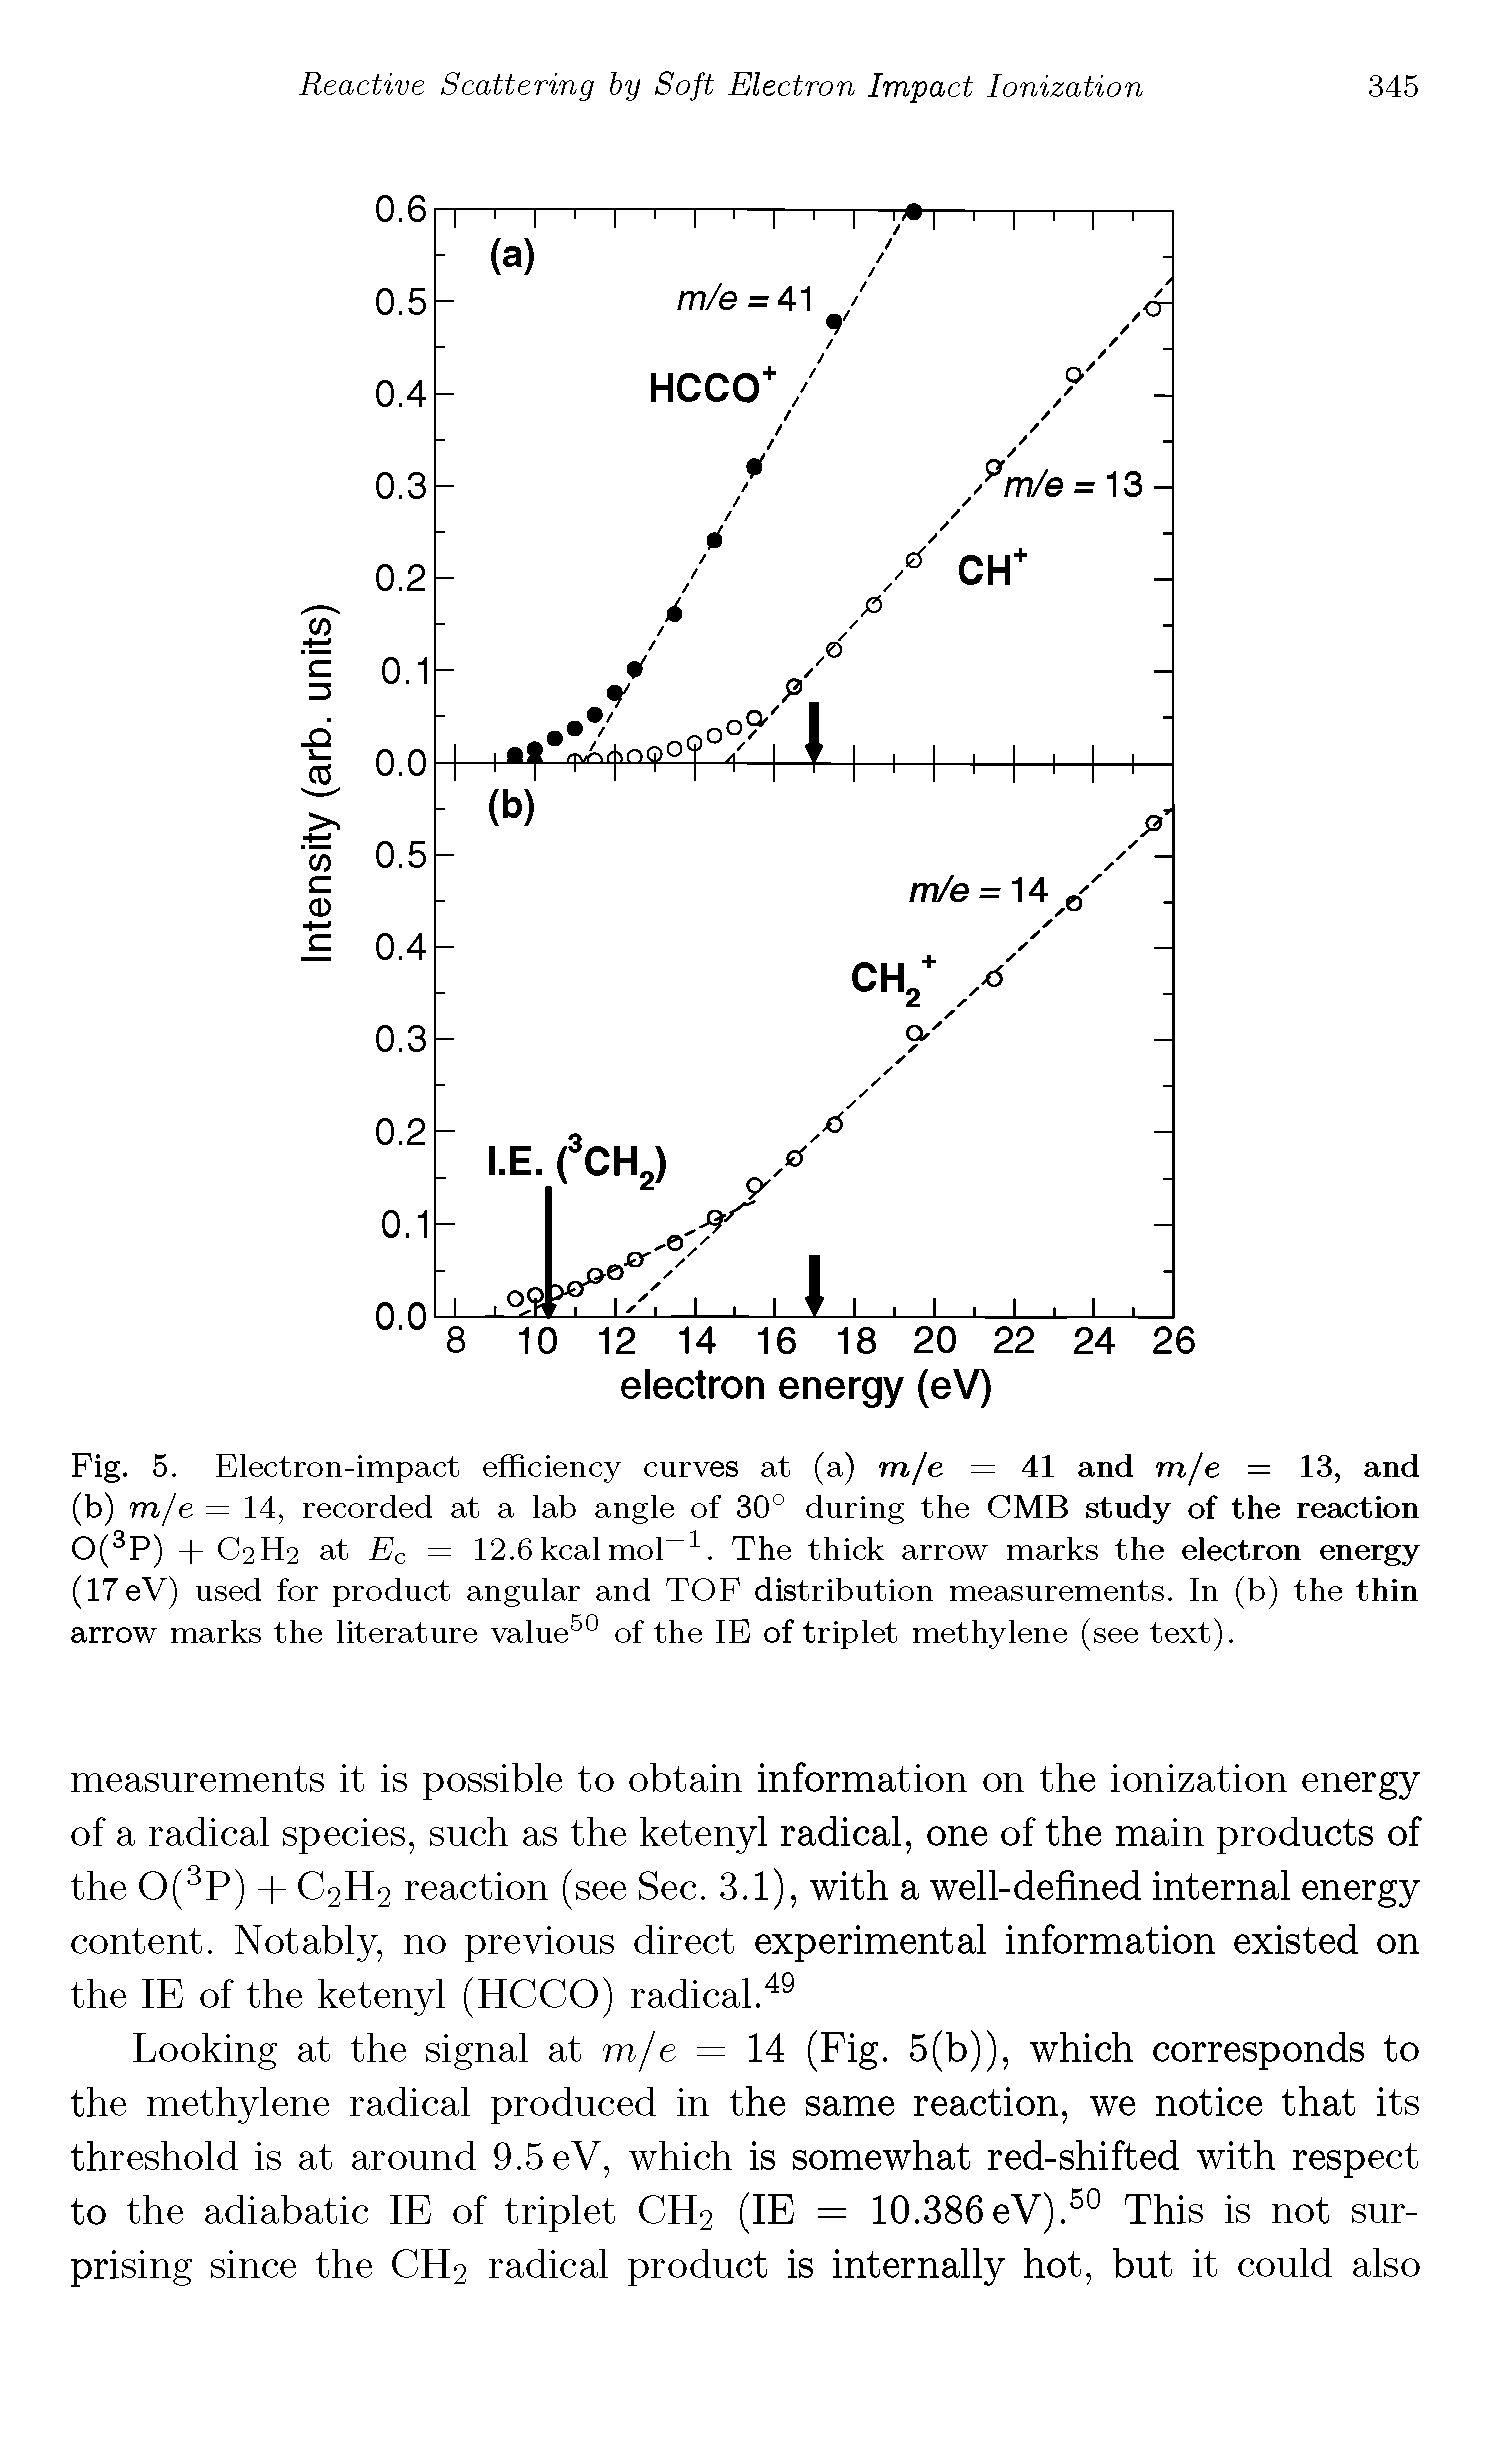 Fig. 5. Electron-impact efficiency curves at (a) m/e = 41 and m/e = 13, and (b) m/e = 14, recorded at a lab angle of 30° during the CMB study of the reaction 0(3P) + C2H2 at Ec = 12.6kcalmol 1. The thick arrow marks the electron energy (17eV) used for product angular and TOF distribution measurements. In (b) the thin arrow marks the literature value50 of the IE of triplet methylene (see text).